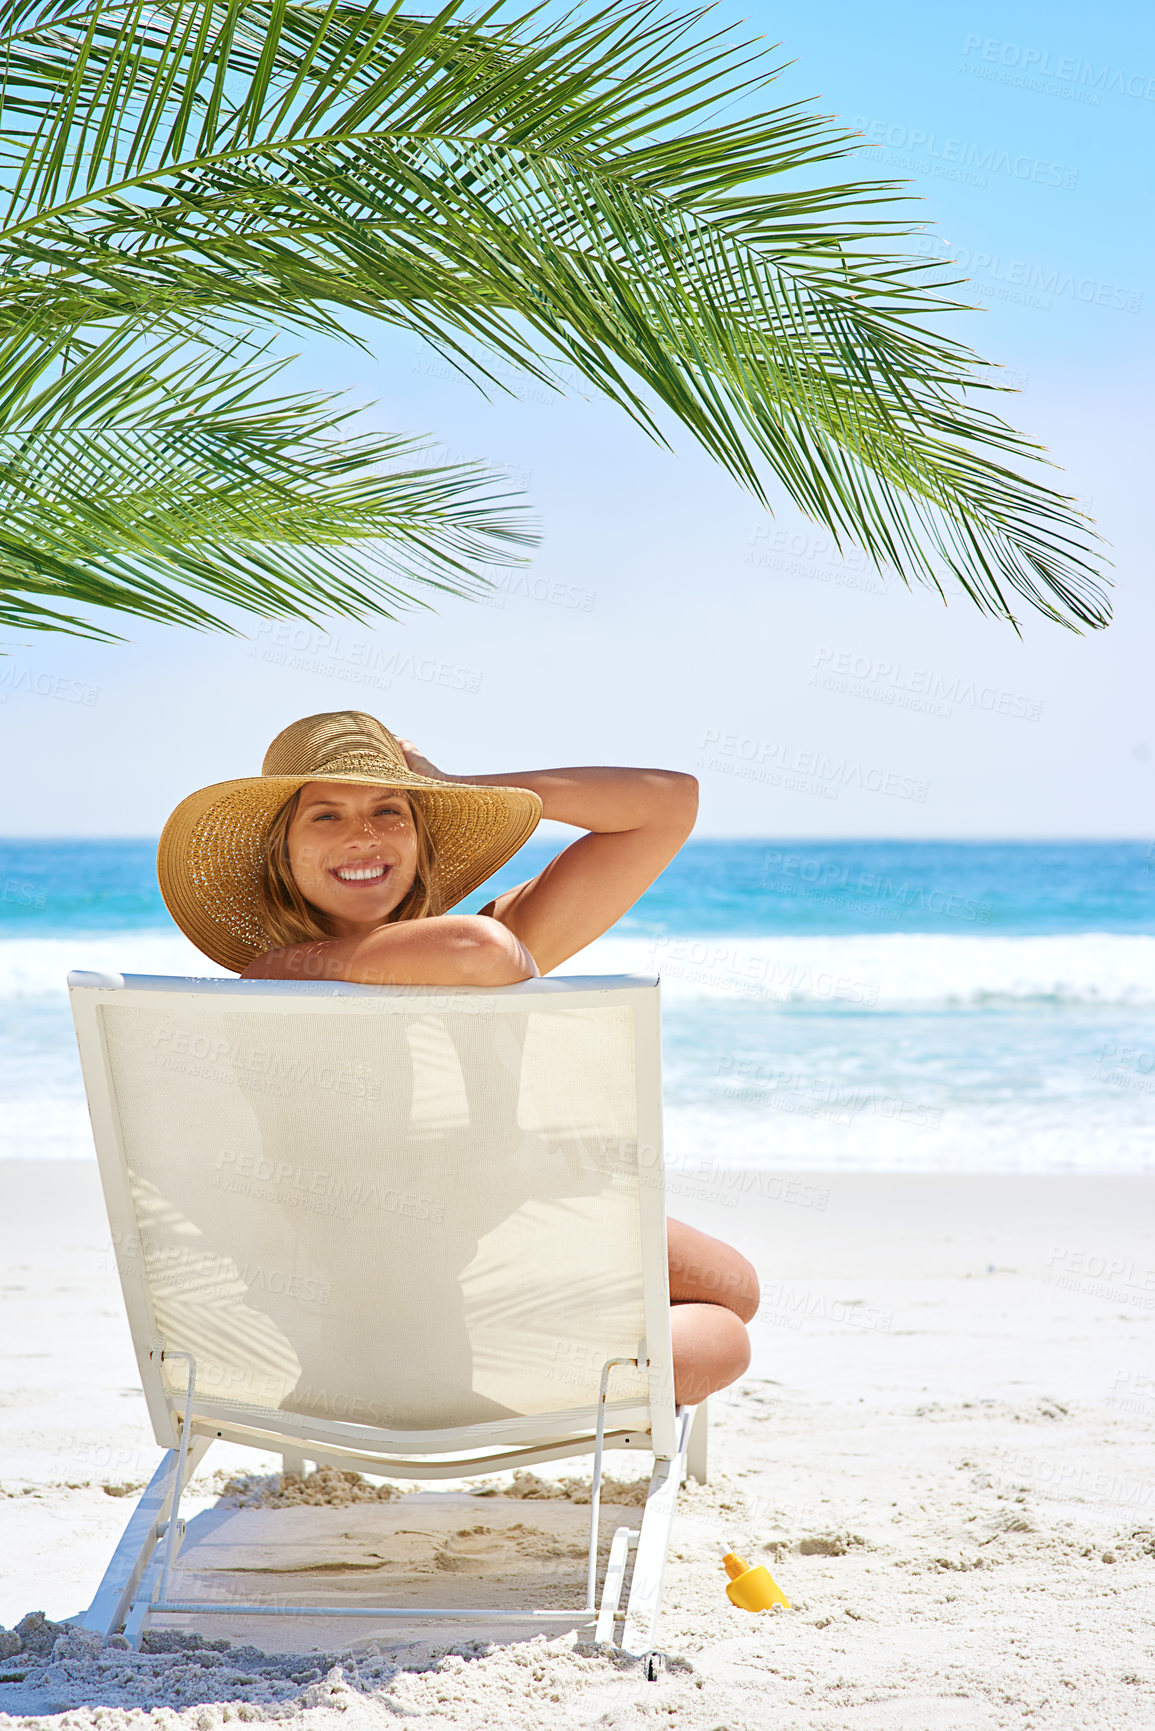 Buy stock photo Rearview portrait of a young woman relaxing at the beach